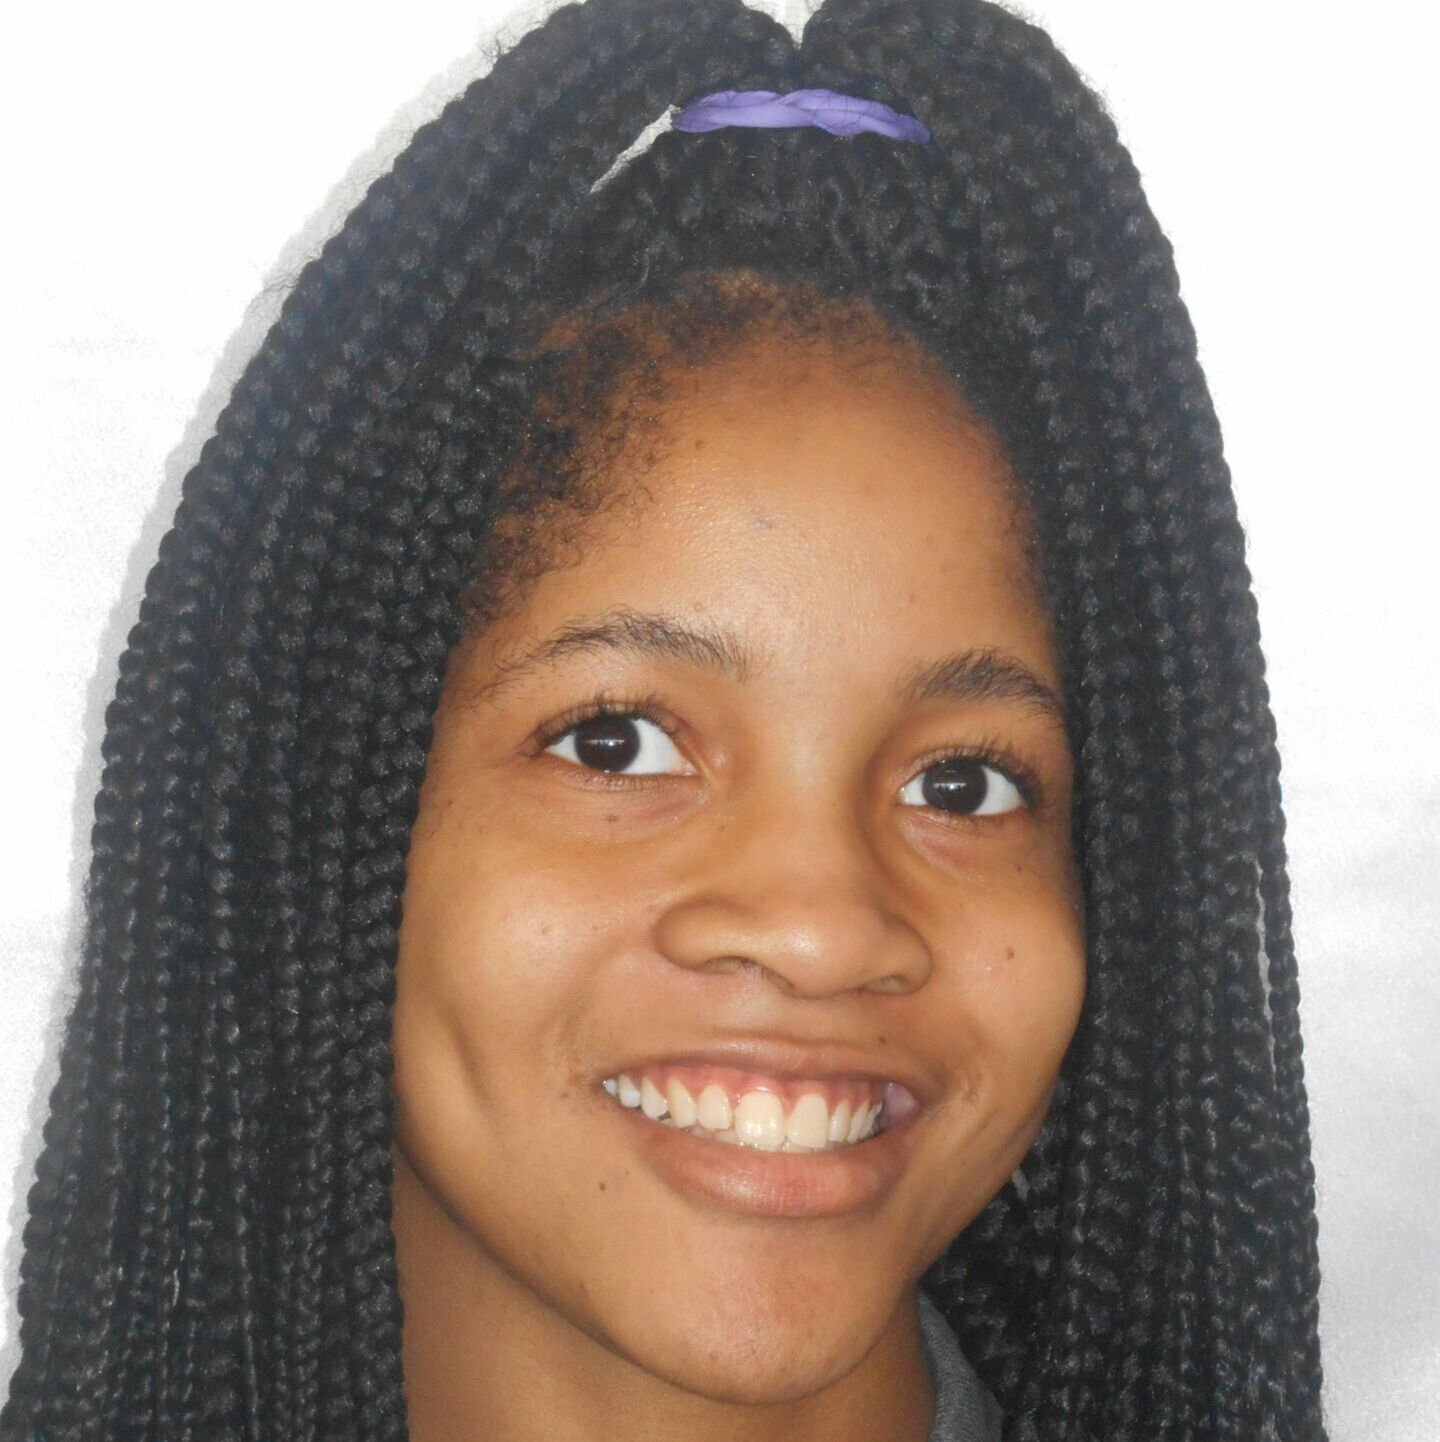 Photo shows a high school headshot of Latonya Anderson, a Class of 2017 alum of Butler College Prep. She is a young Black woman with long dark brown hair. In this photo, her hair is straight and put up in a half-part. She is wearing a dark gray polo shirt.